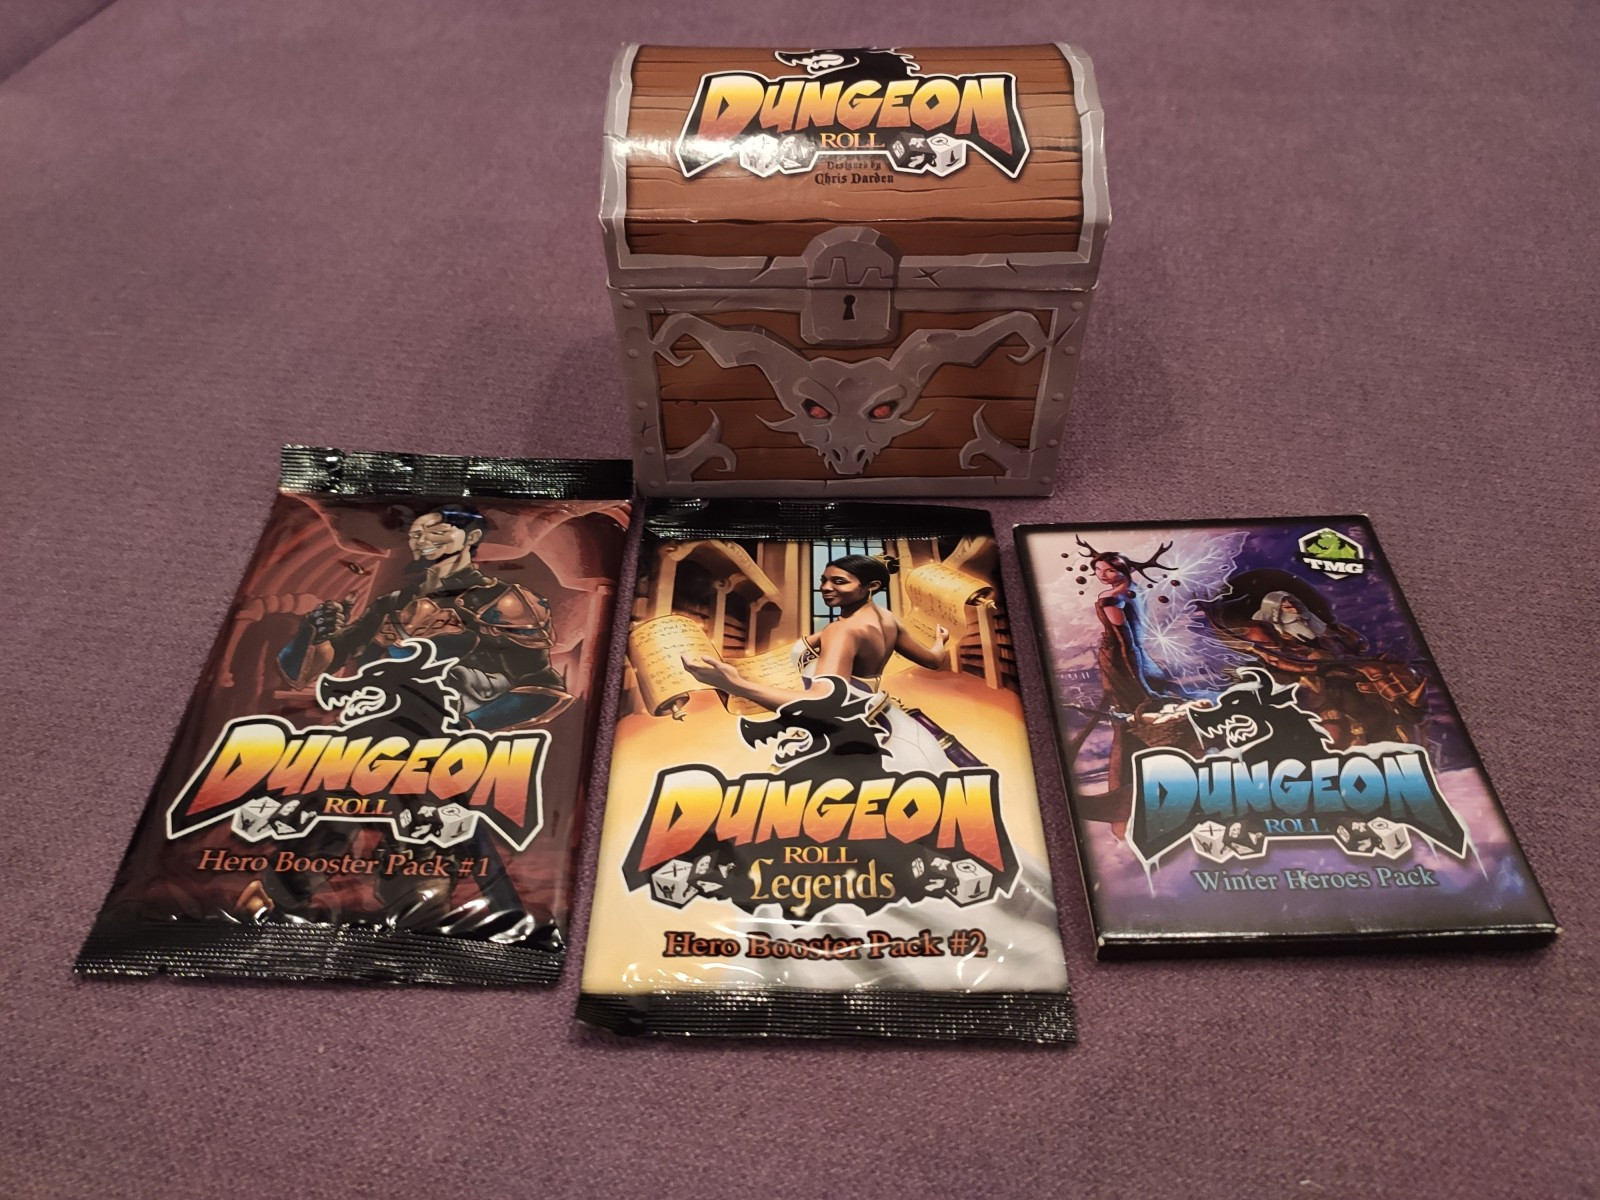 Dungeon roll + Pack 1 + Pack 2 + Winter Promo Pack